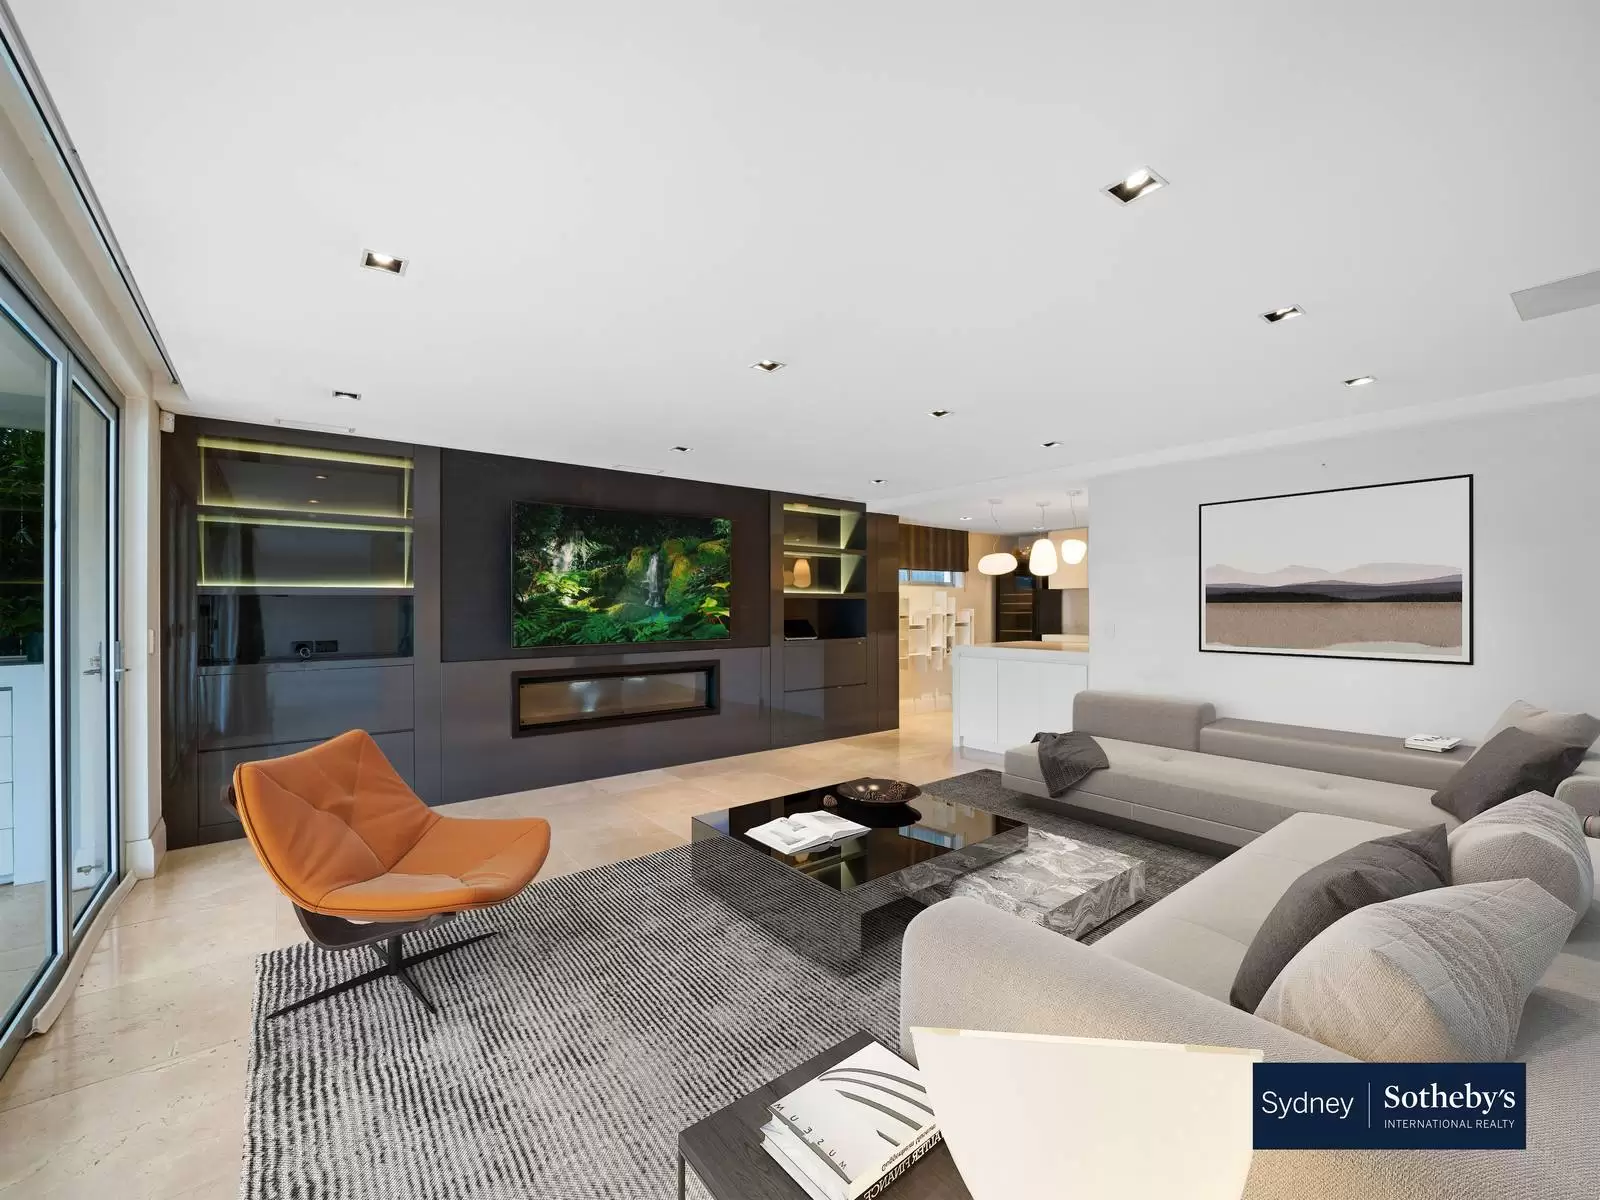 6a Bulkara Road, Bellevue Hill Leased by Sydney Sotheby's International Realty - image 3